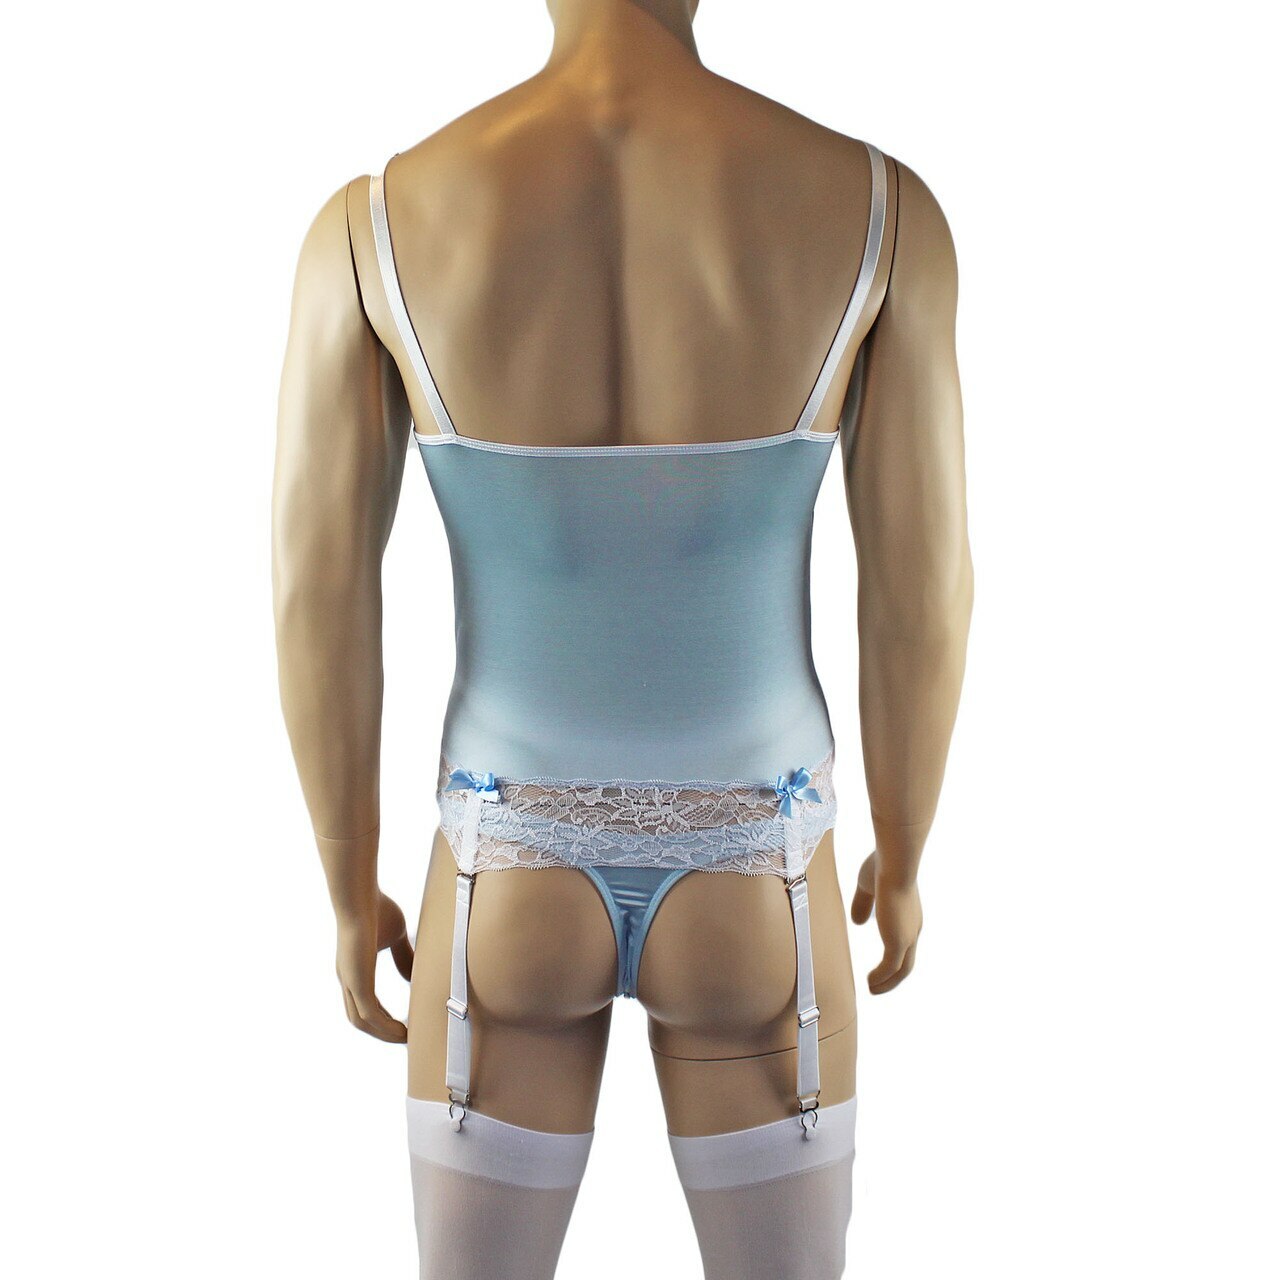 Mens Joanne Camisole Bustier Garter Top with Thong & Stockings - Sizes up to 3XL Light Blue and White Lace